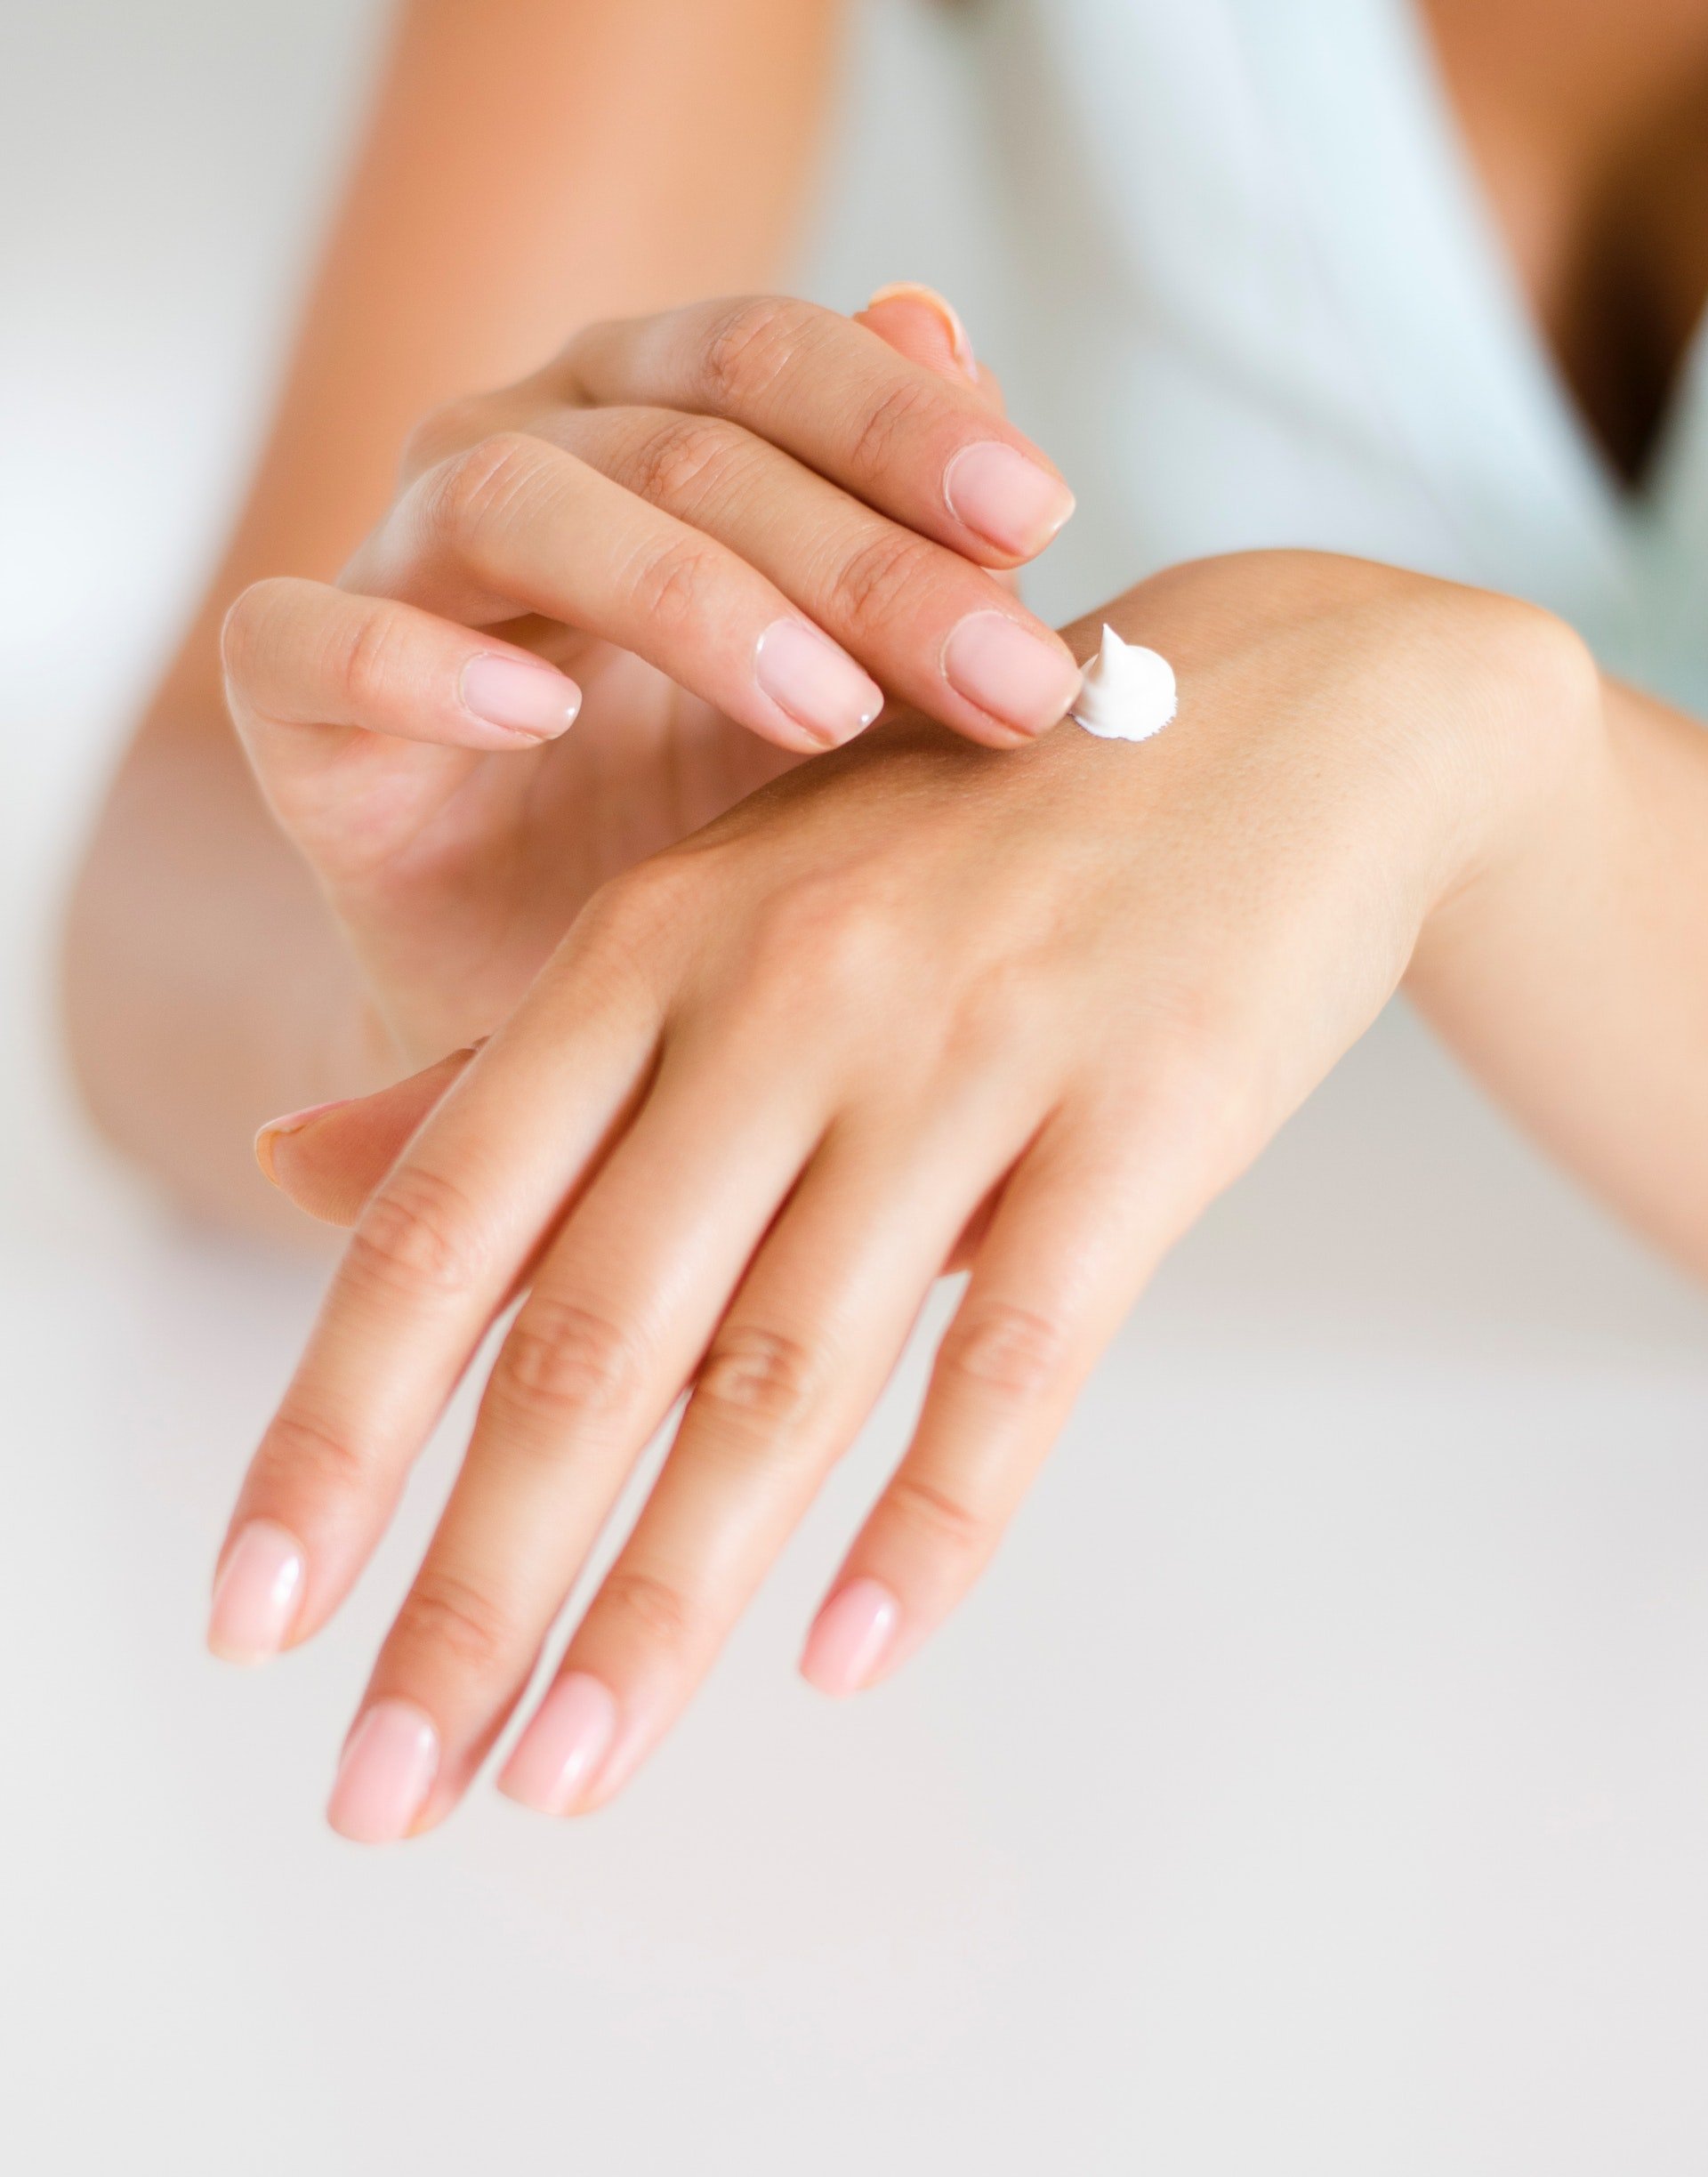 Best Non-Toxic Hand Creams & Hand Lotions for Dry Hands